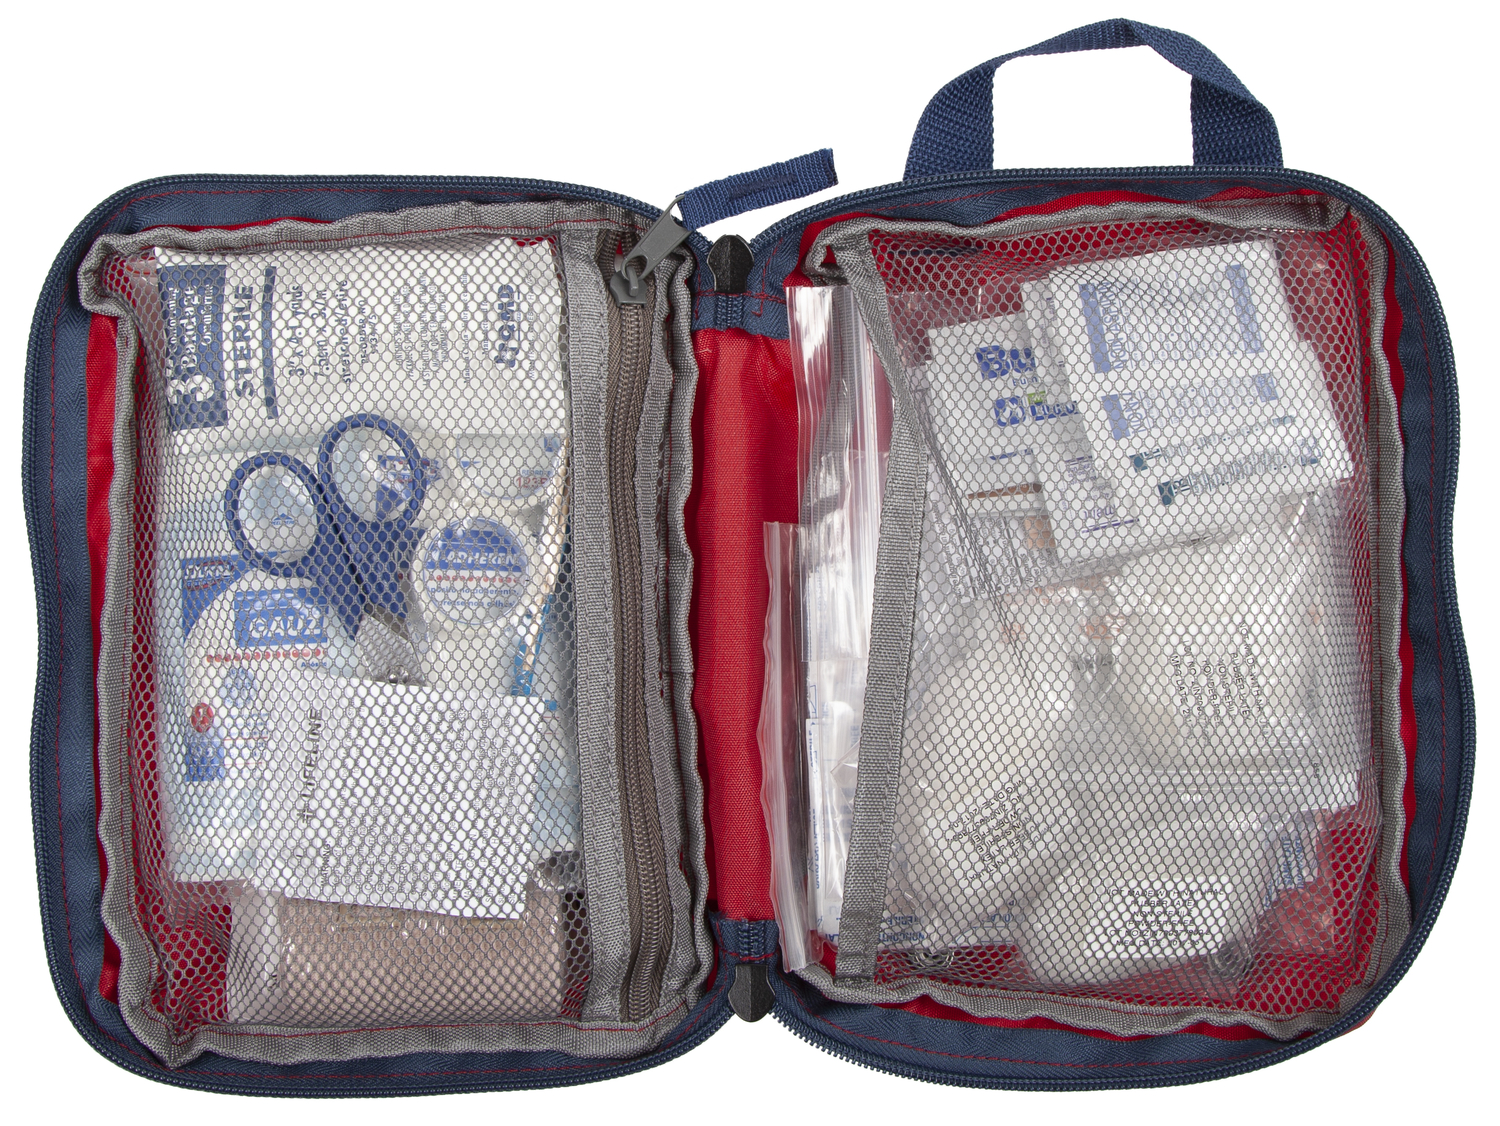 Lifeline Base Camp First Aid Kit 171 Pieces - image 2 of 3